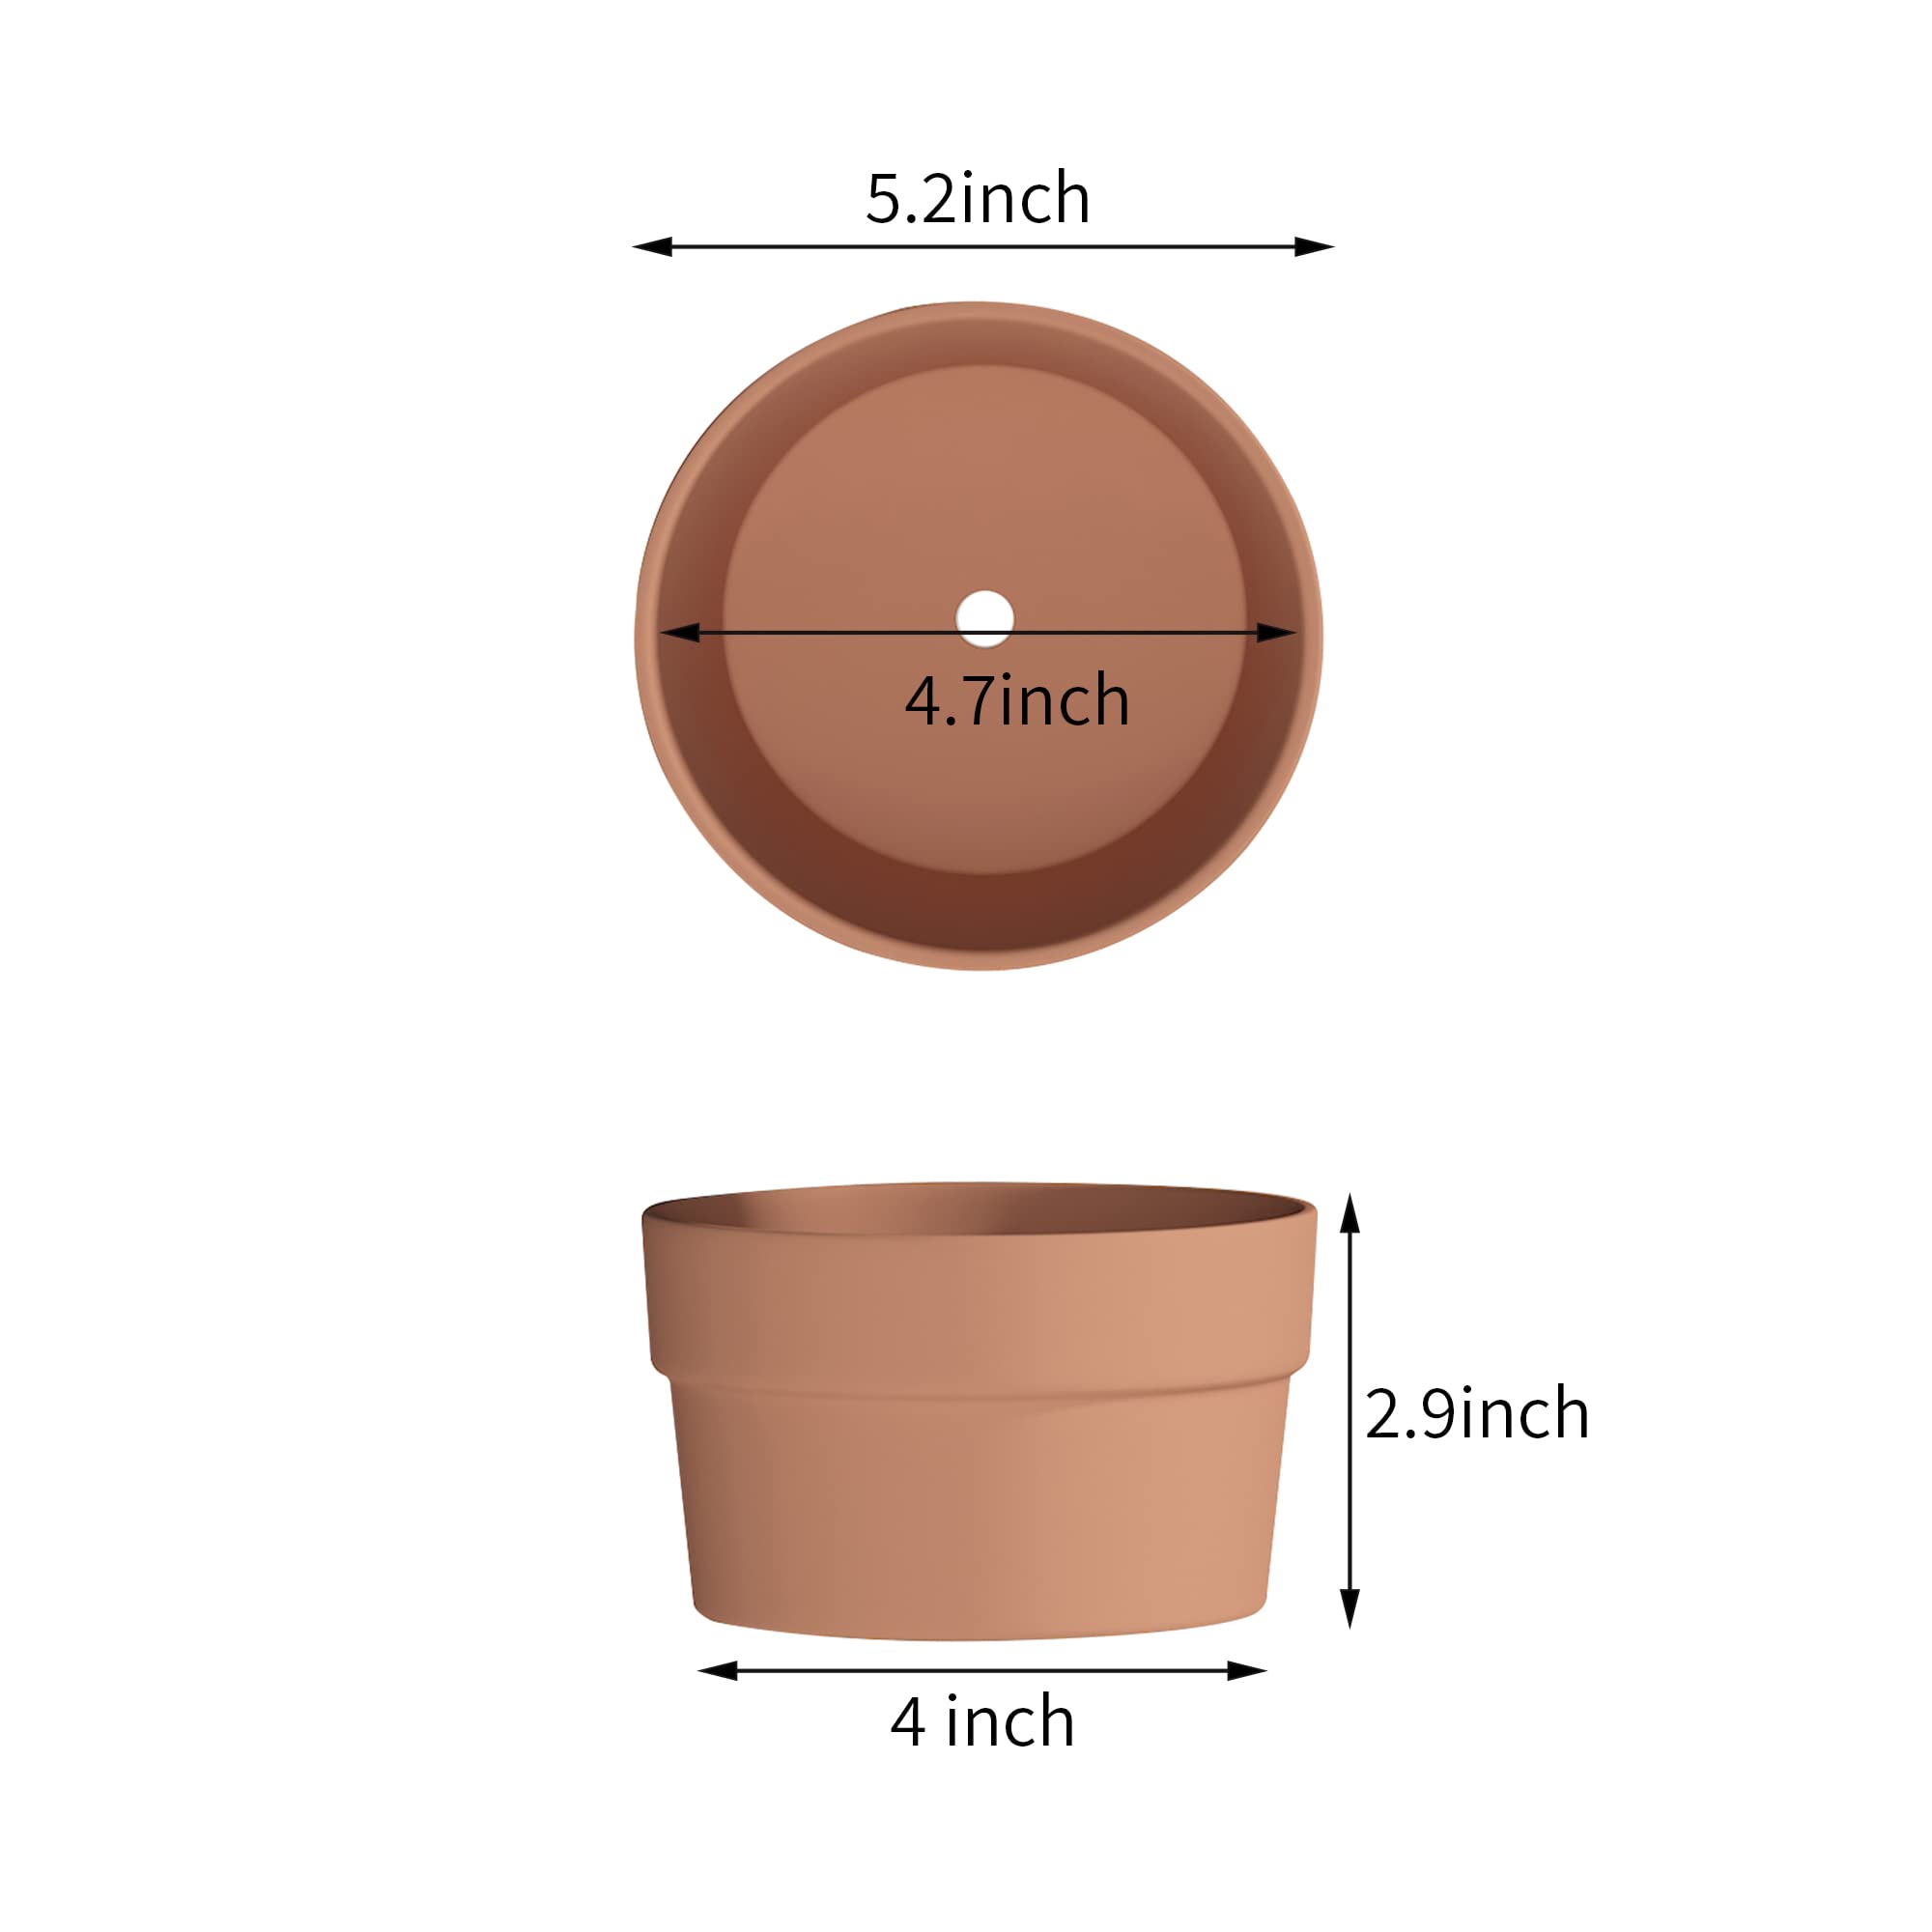 Fcacti 5 Inch Terracotta Shallow Succulent Pot - 8 Pack Medium Terra Cotta Clay Pots with Drainage Hole, Round Shallow Terra-Cotta Bonsai Pot for Indoor/Outdoor Plants